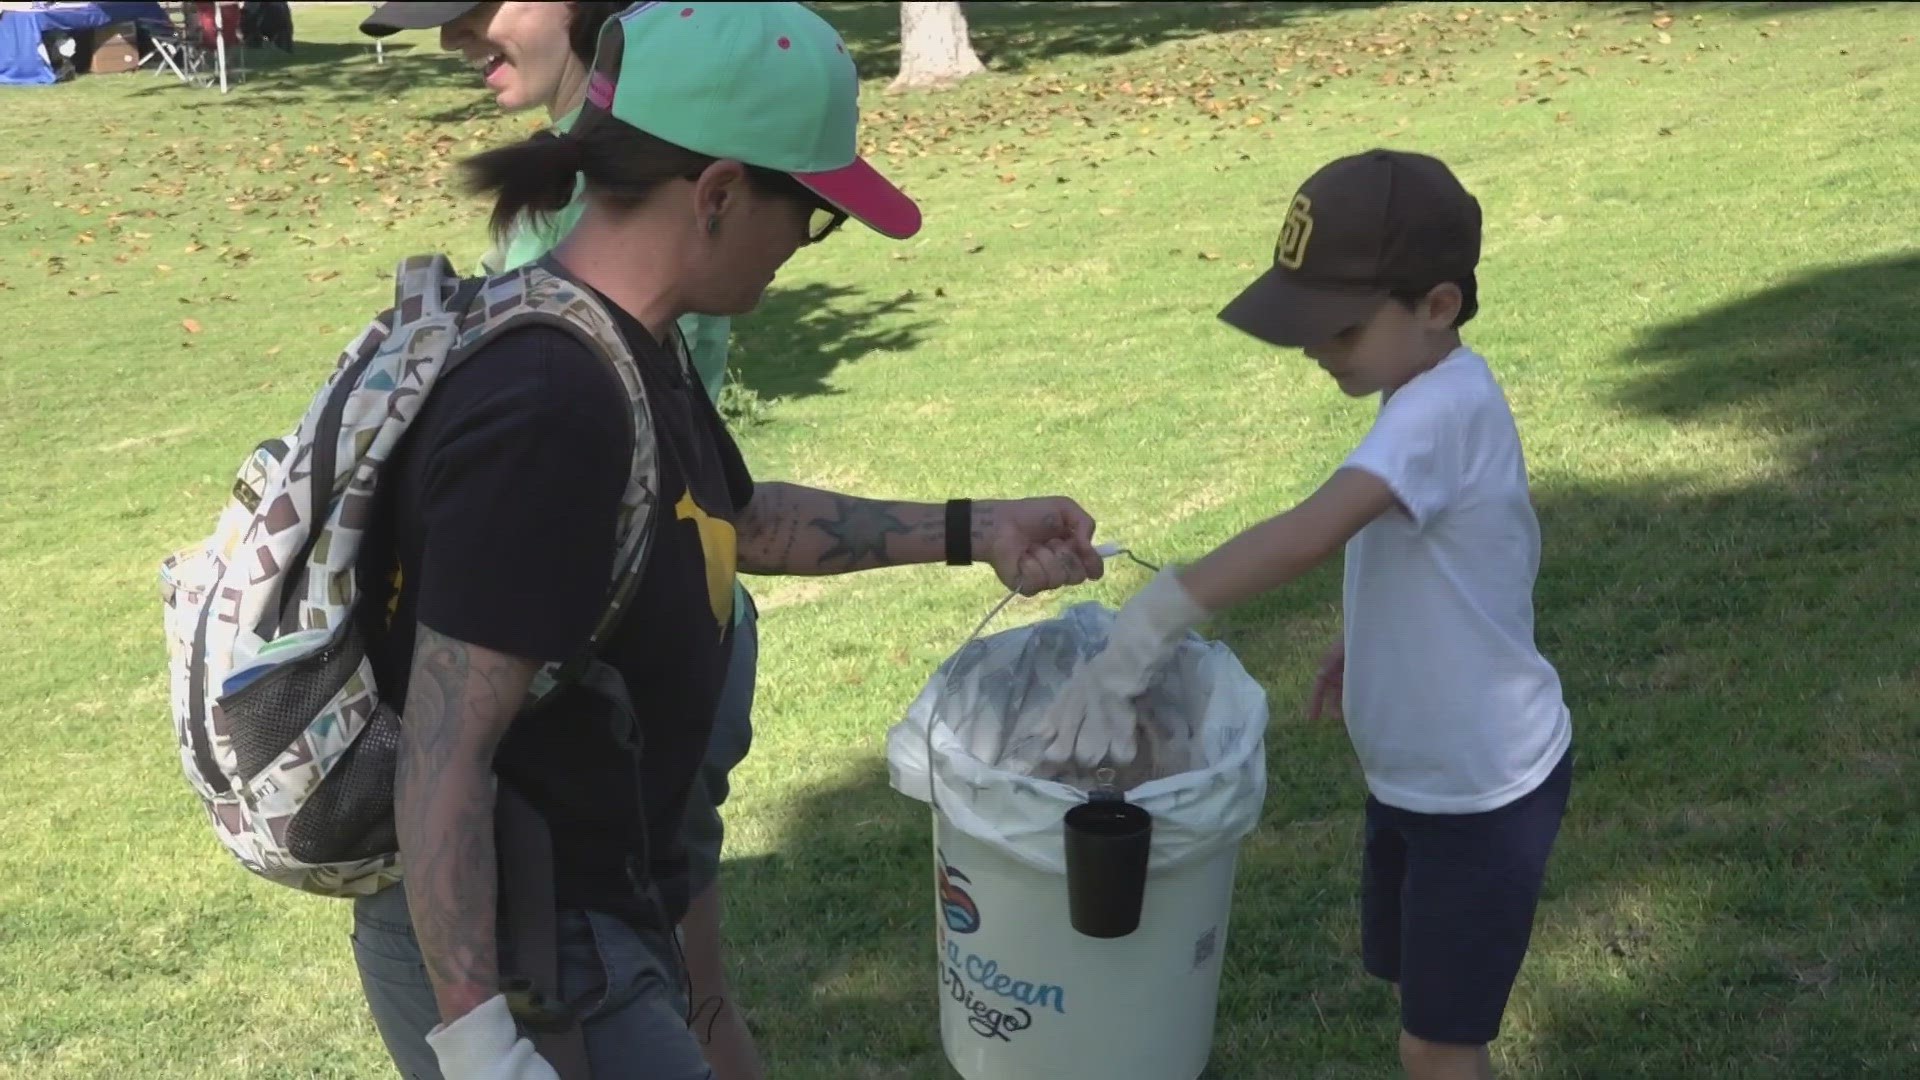 More than 5,000 volunteers picked up trash at more than 100 sites across San Diego County.